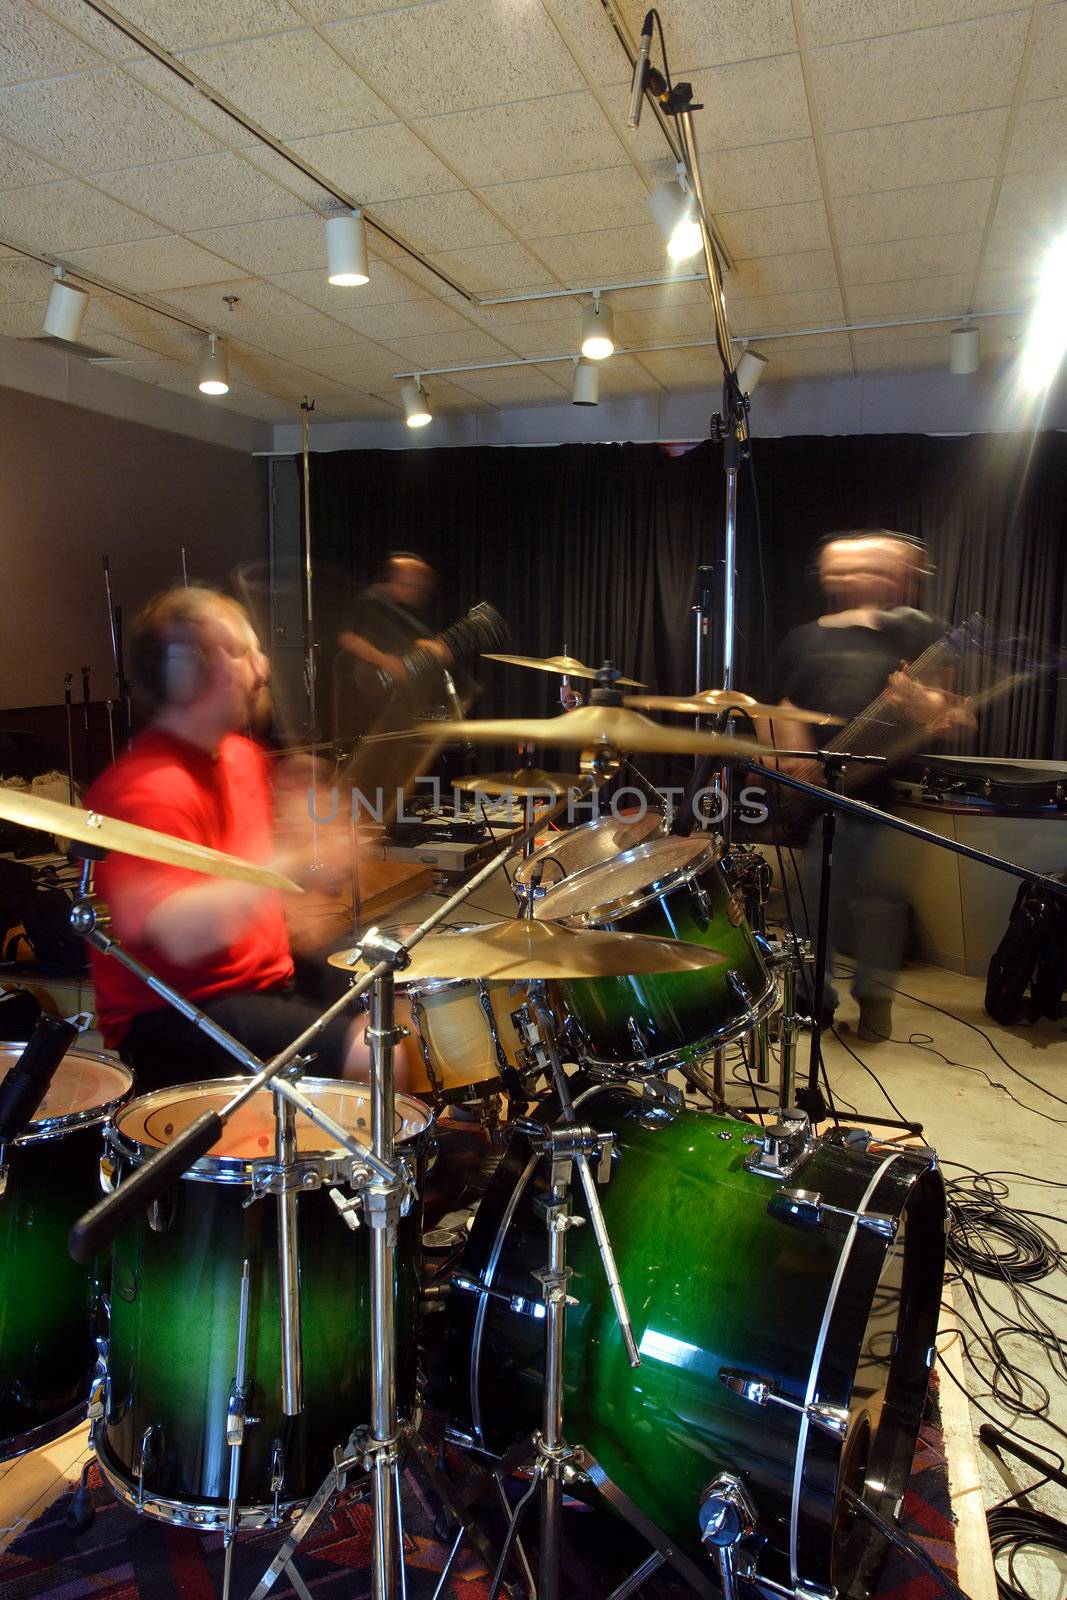 A bass player, guitar player and drummer recording tracks in a recording studio.  Slow shutter speed with ambient light - players have motion blur from slow shutter speed.
